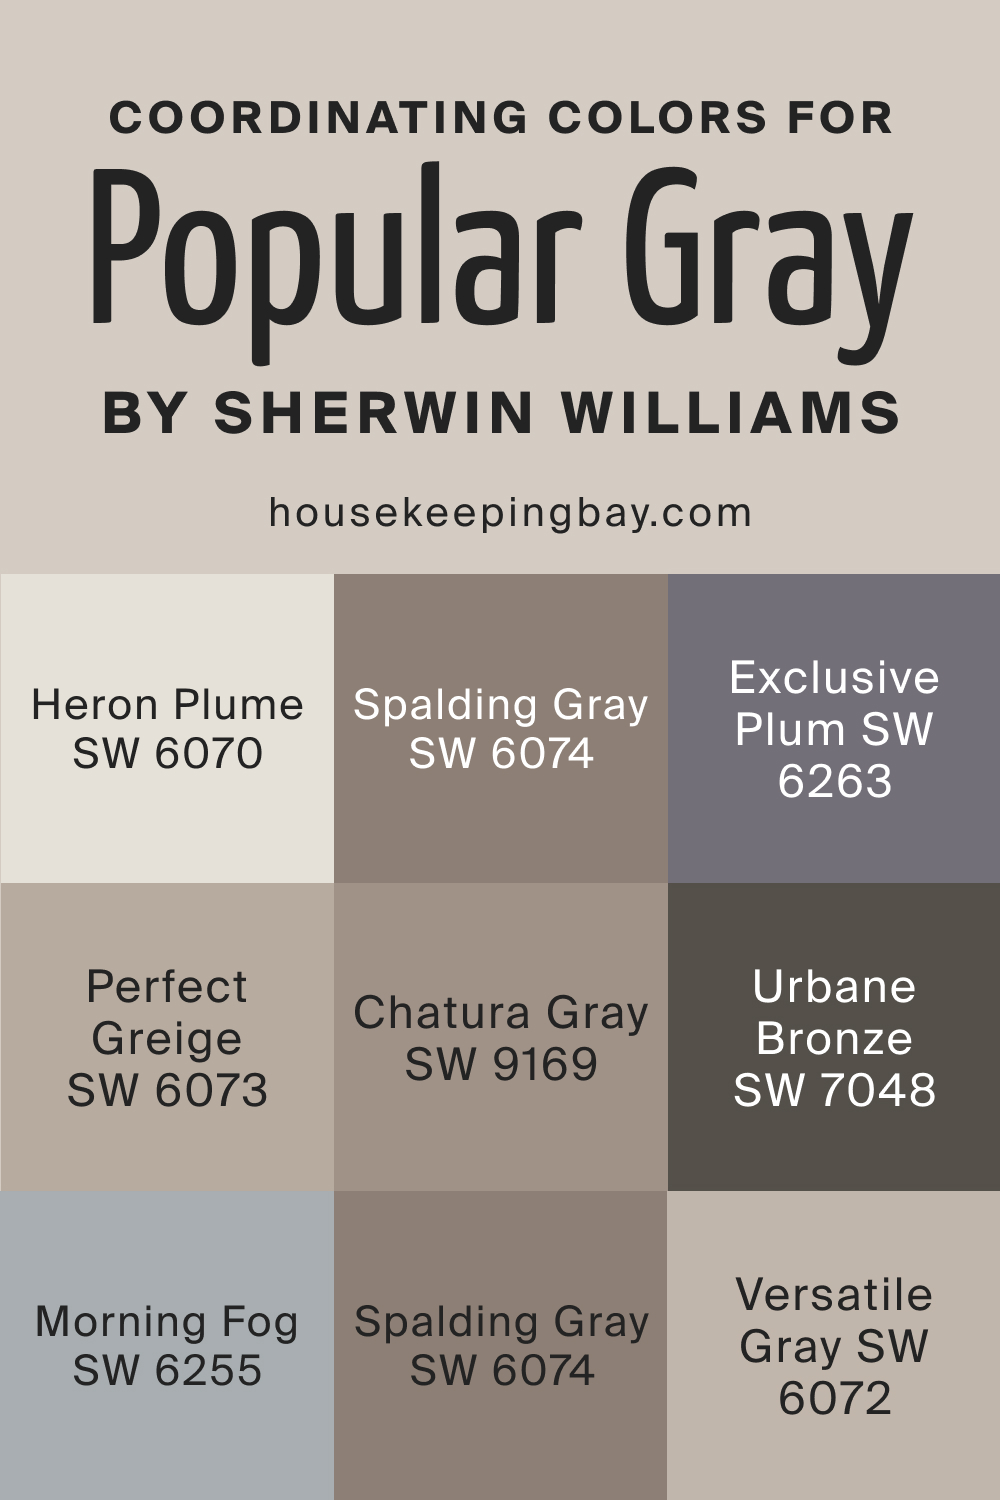 Coordinating Colors for Popular Gray SW by Sherwin Williams